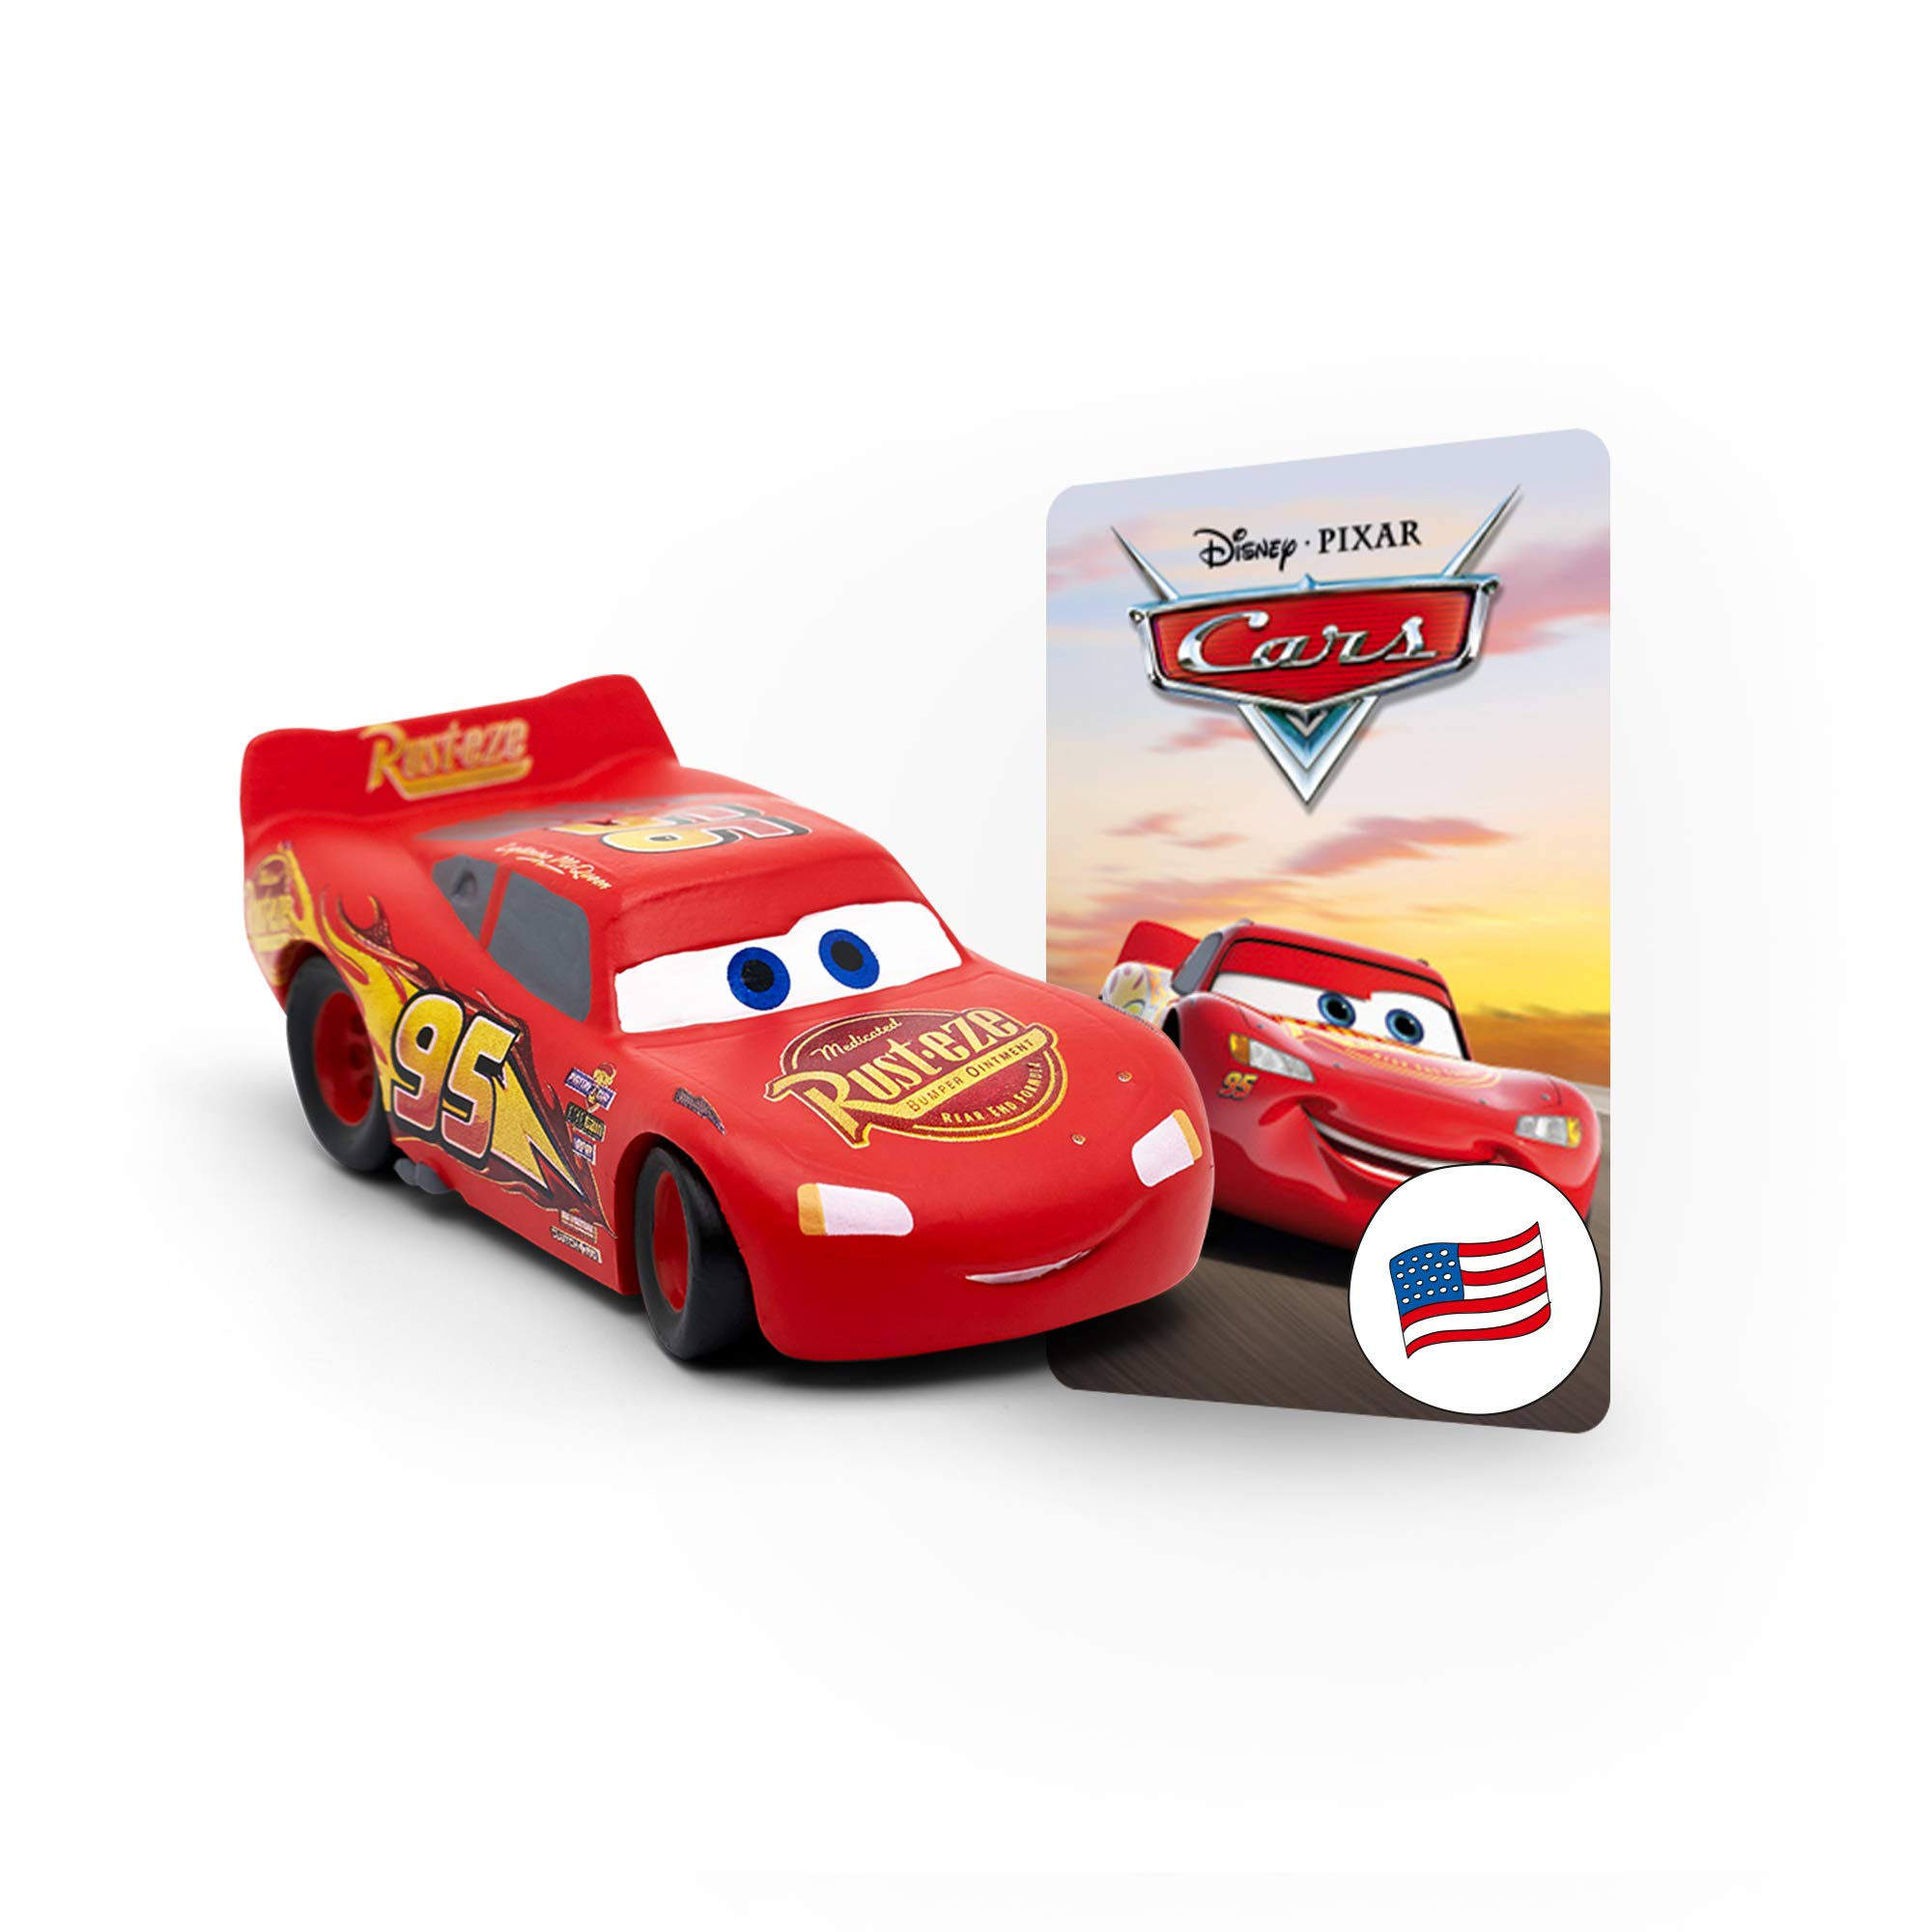 Tonies Lightning McQueen Audio Play Character From Disney And Pixar's Cars